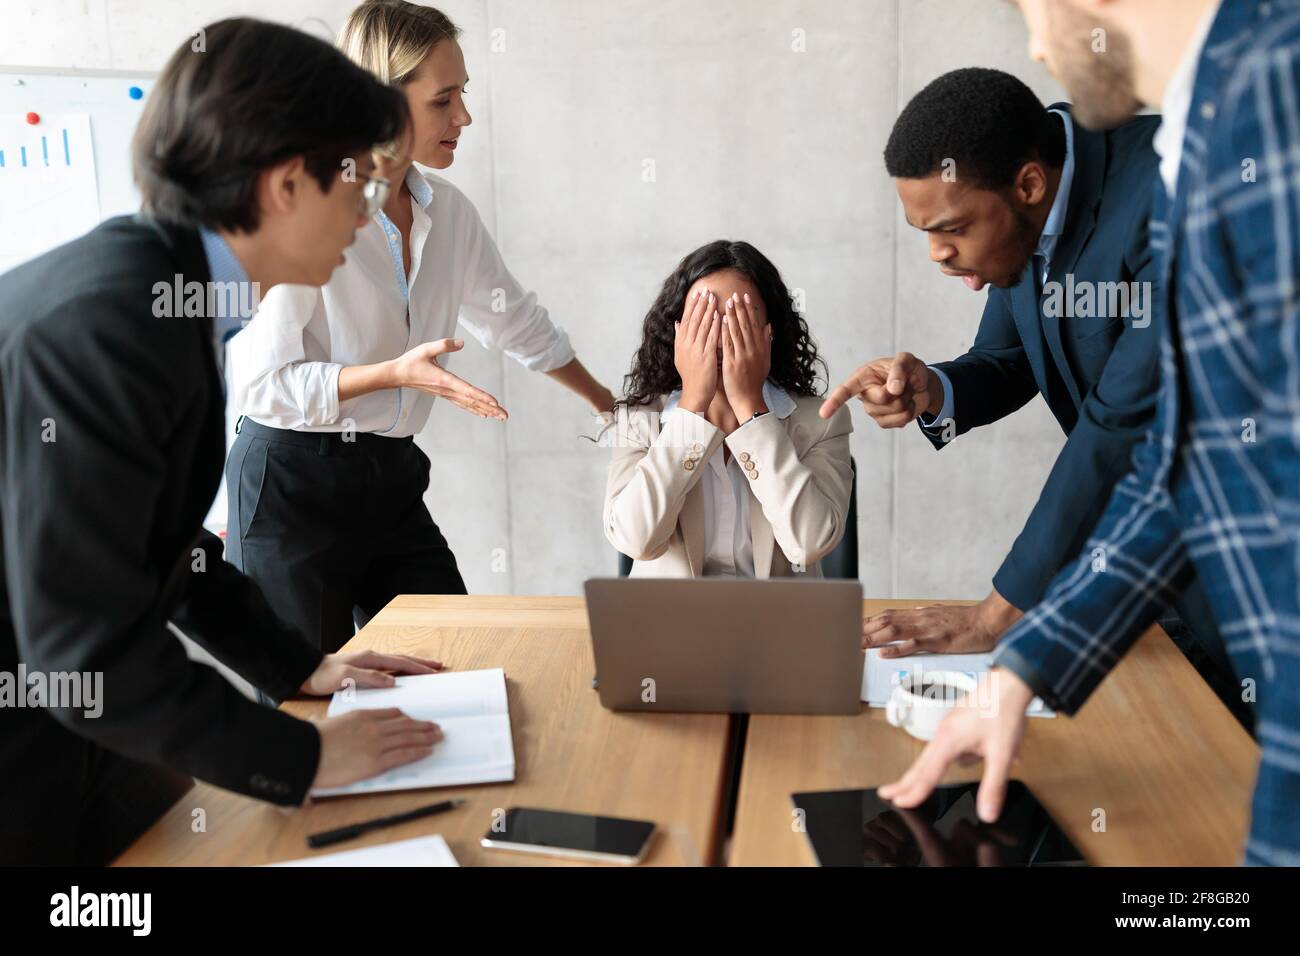 Displeased Business People Shouting At Unhappy Female Employee In Office Stock Photo